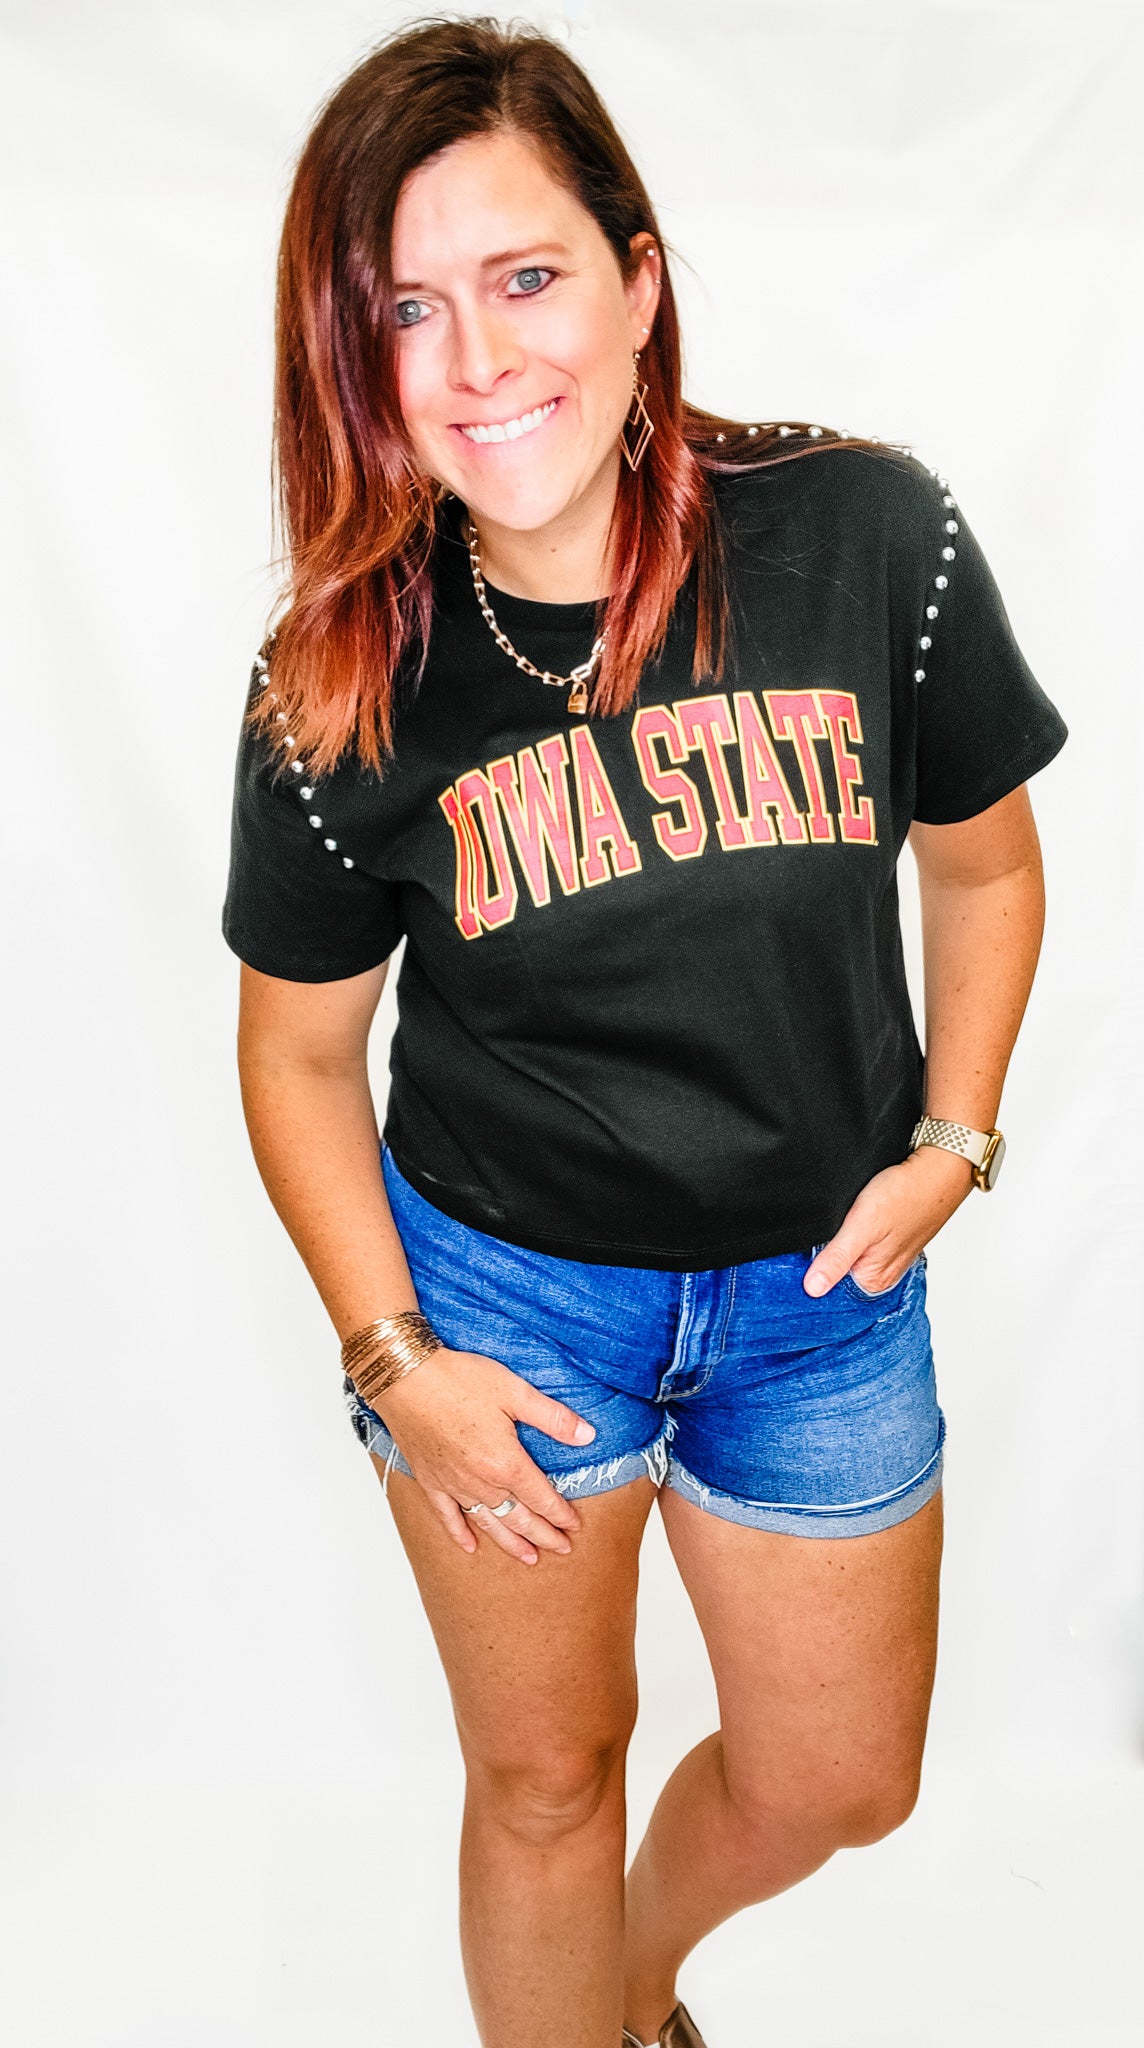 Iowa or Iowa State After Party Studded Crop Short Sleeve